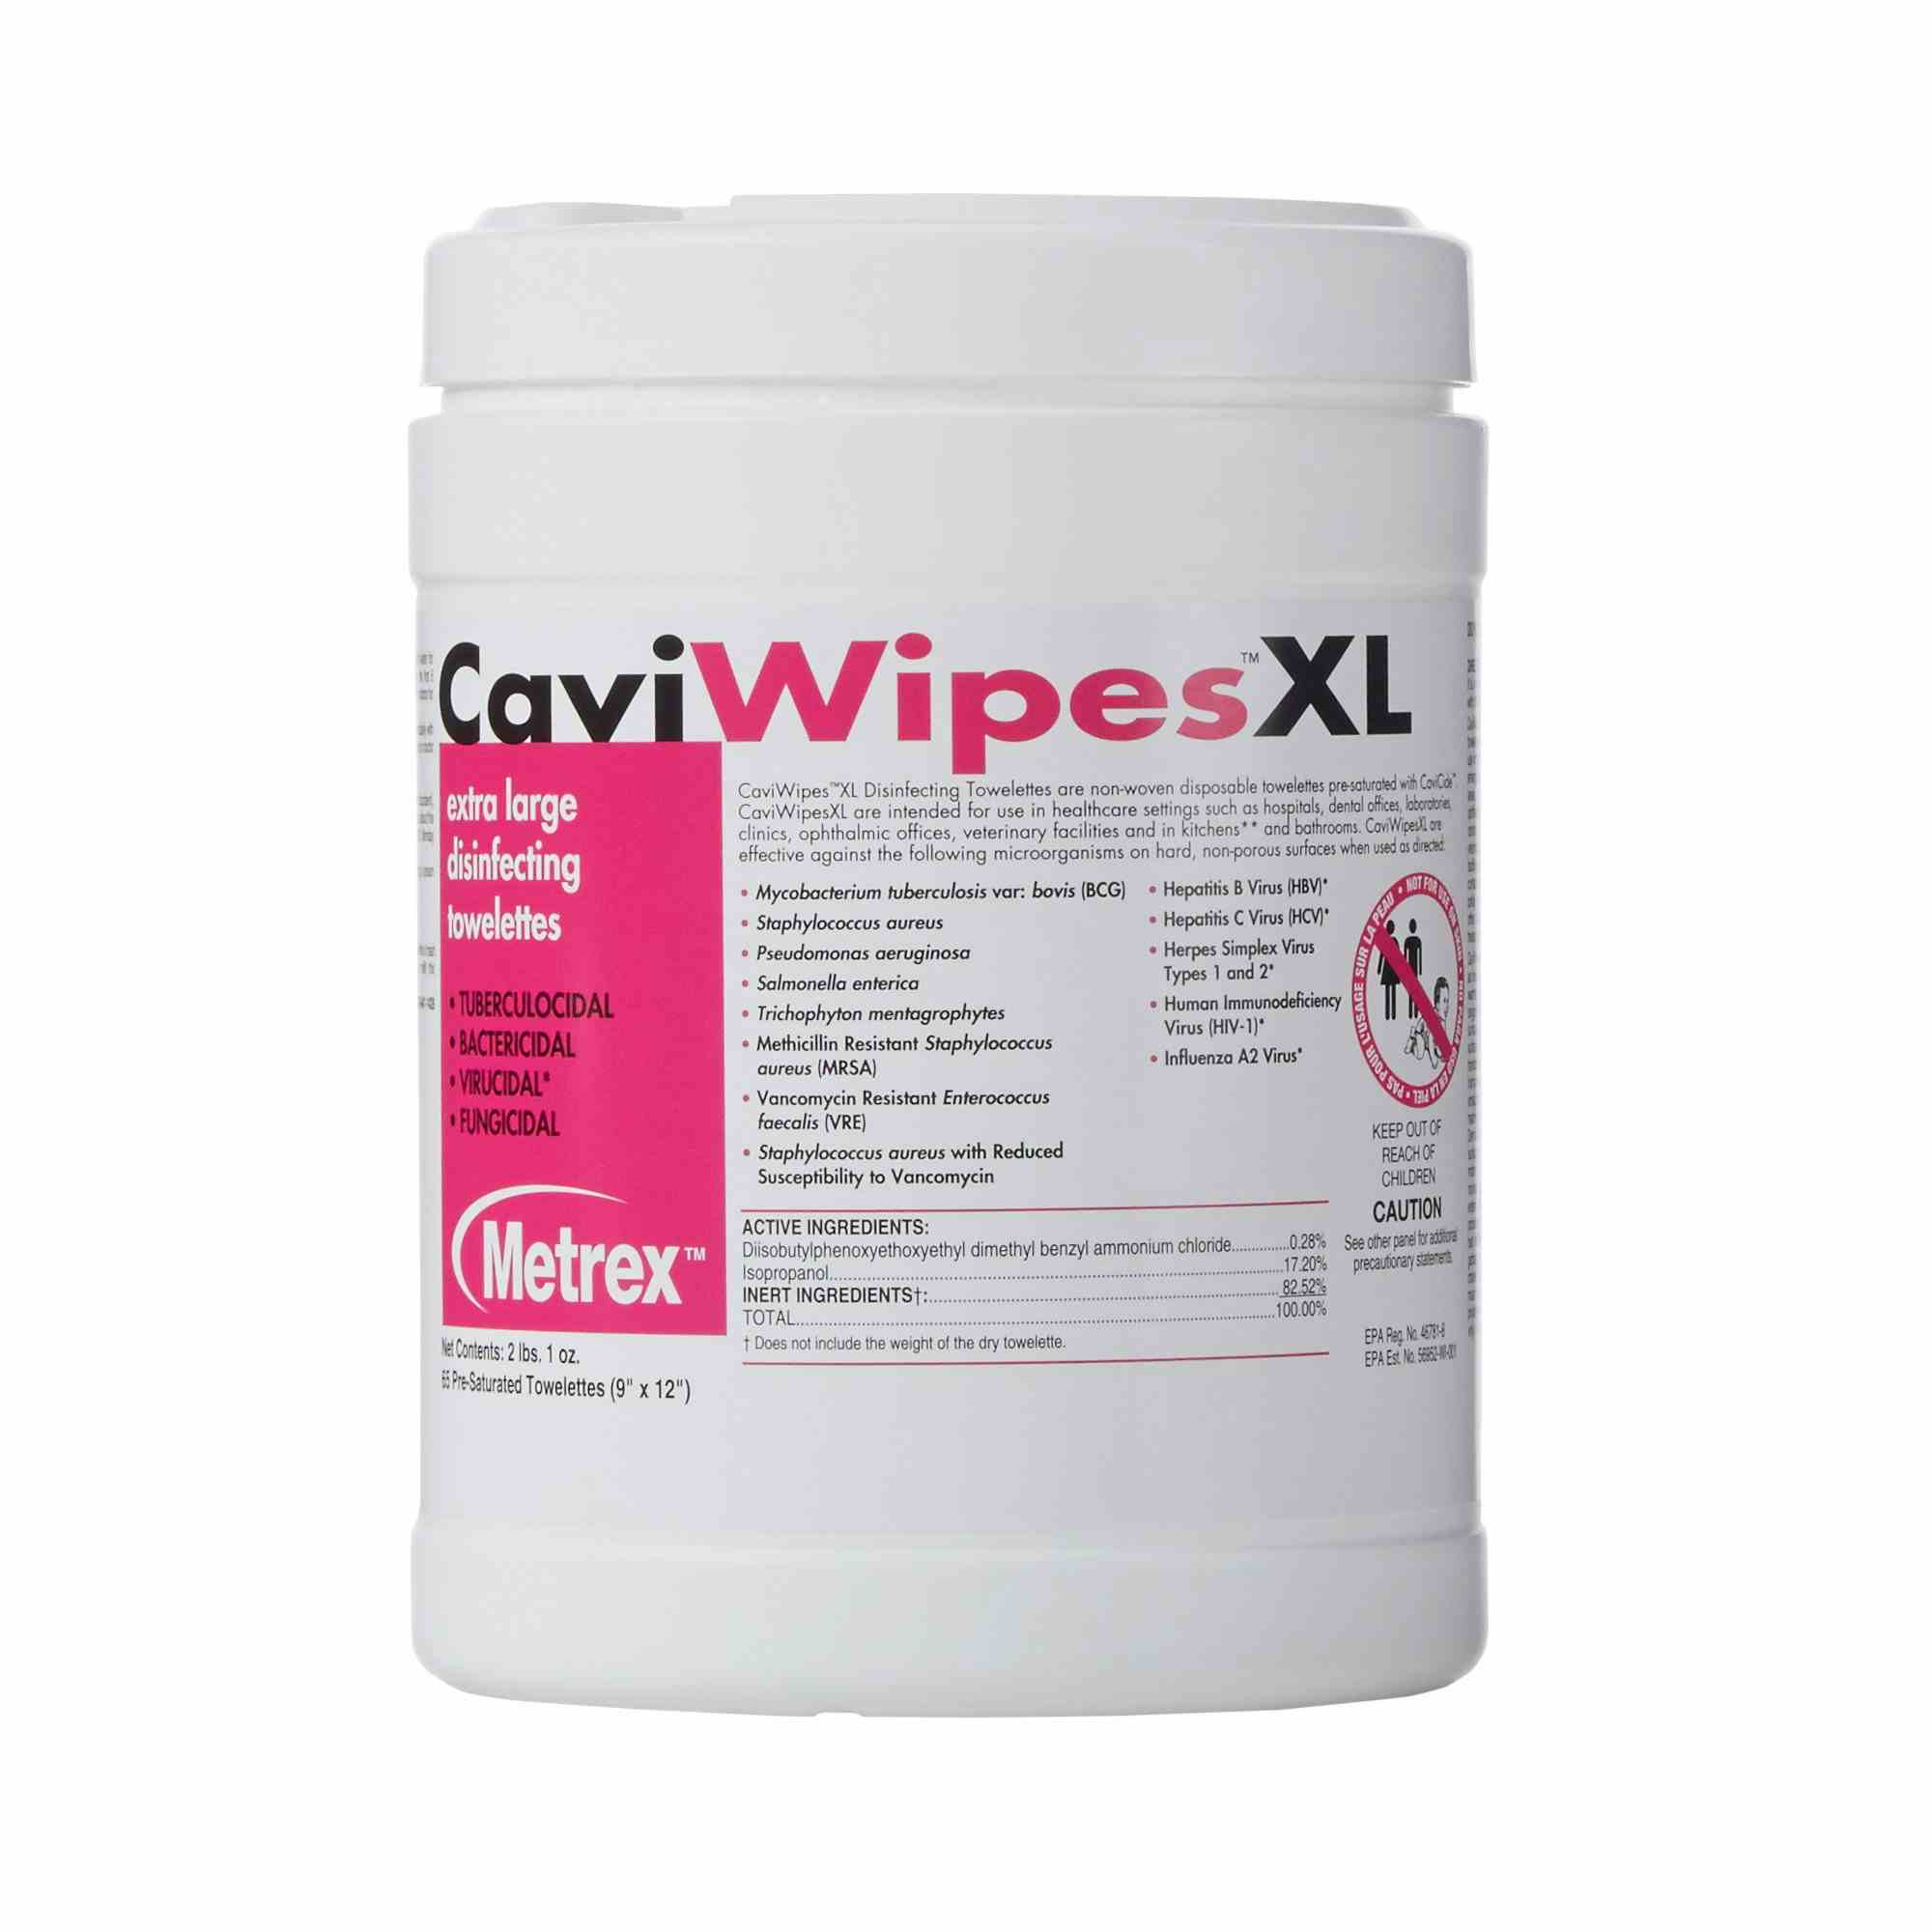 CaviWipes Surface Disinfectant Wipes XL, 13-1150-CN1, 1 Canister